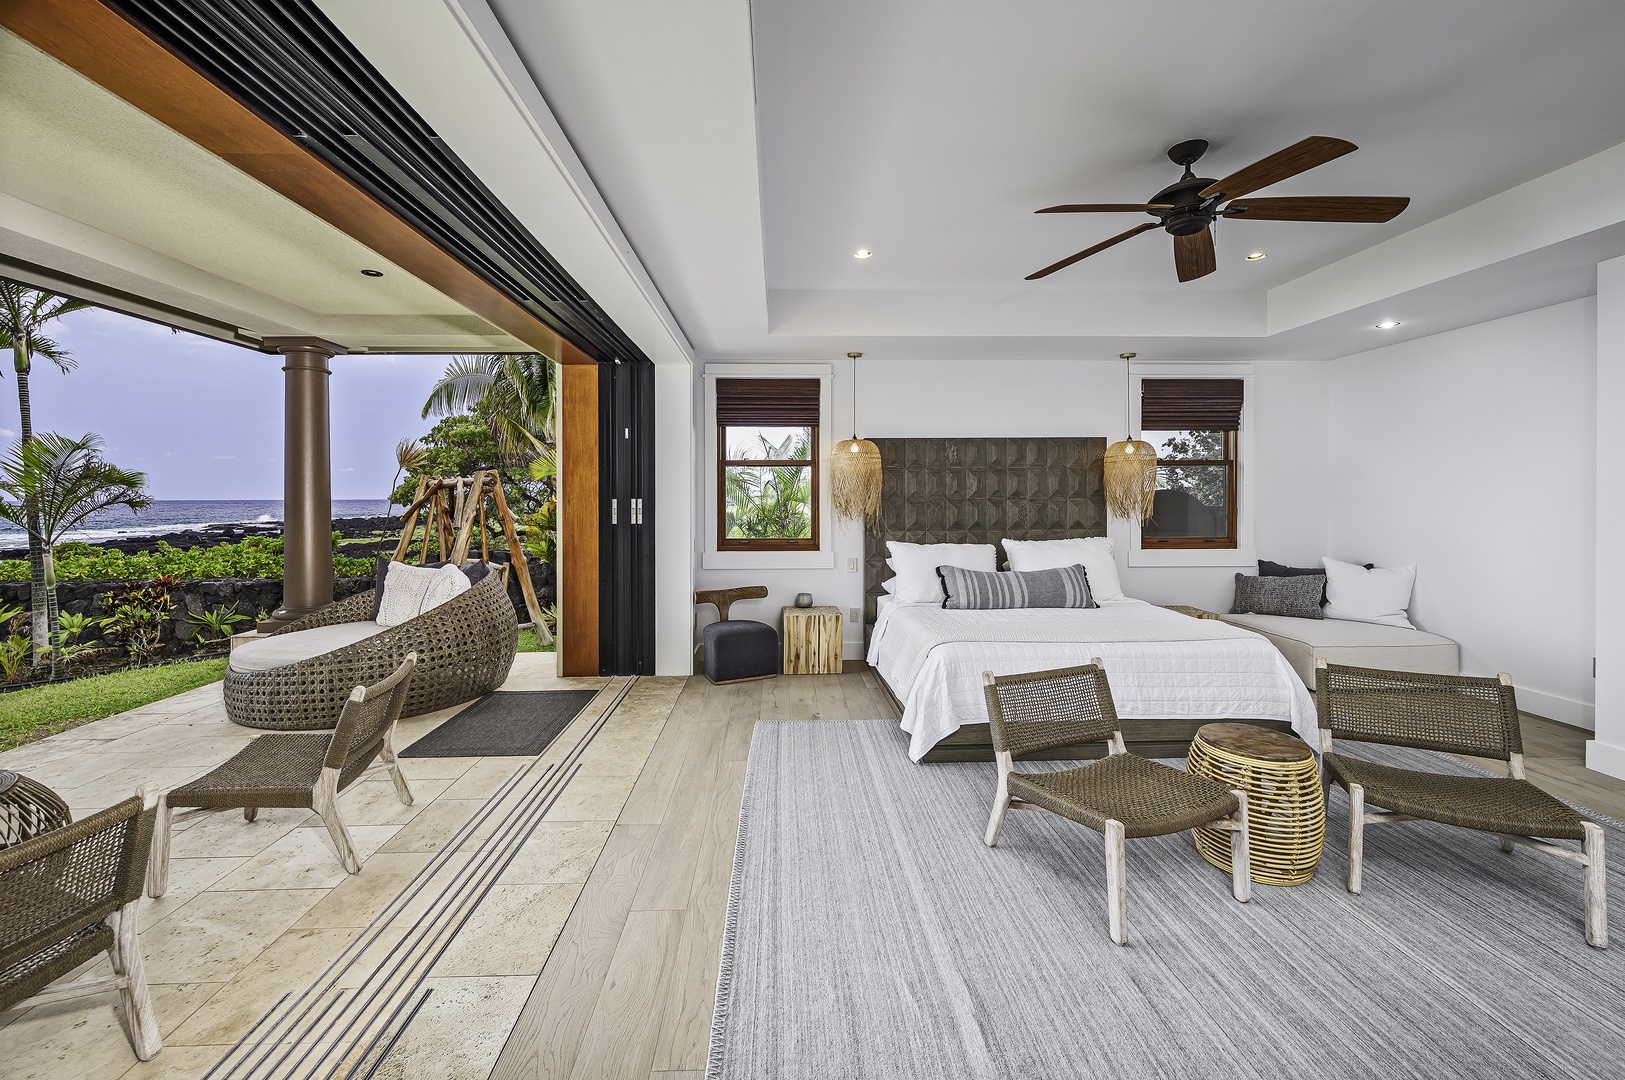 Kailua Kona Vacation Rentals, Alohi Kai Estate • - 2nd Floor Master has a huge outdoor lanai with views for miles and outdoor Restoration Hardware furniture with oversized lounge chairs and chaise lounges